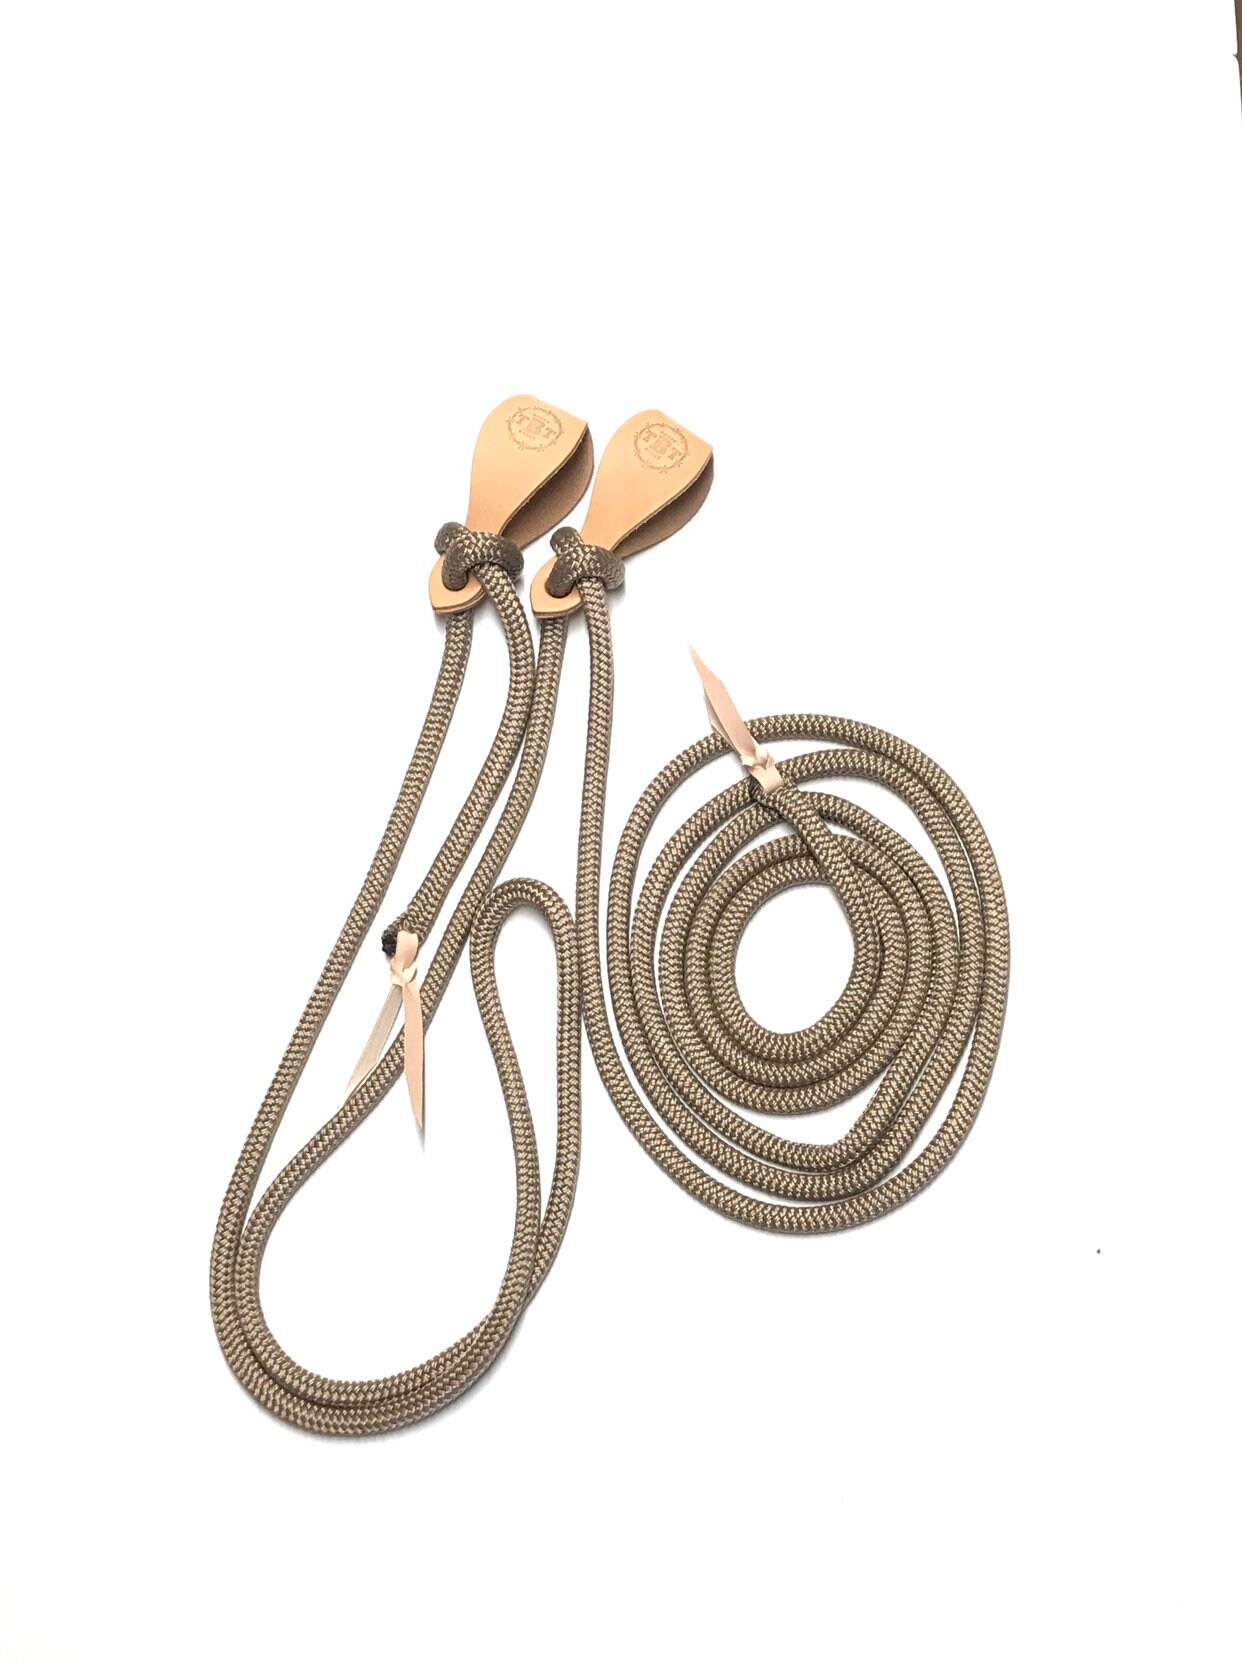 Yacht Rope Mecate Rein, Tan Rein, Slobber Straps, Clinician Rein You Choose Slobber  Strap Color -  New Zealand